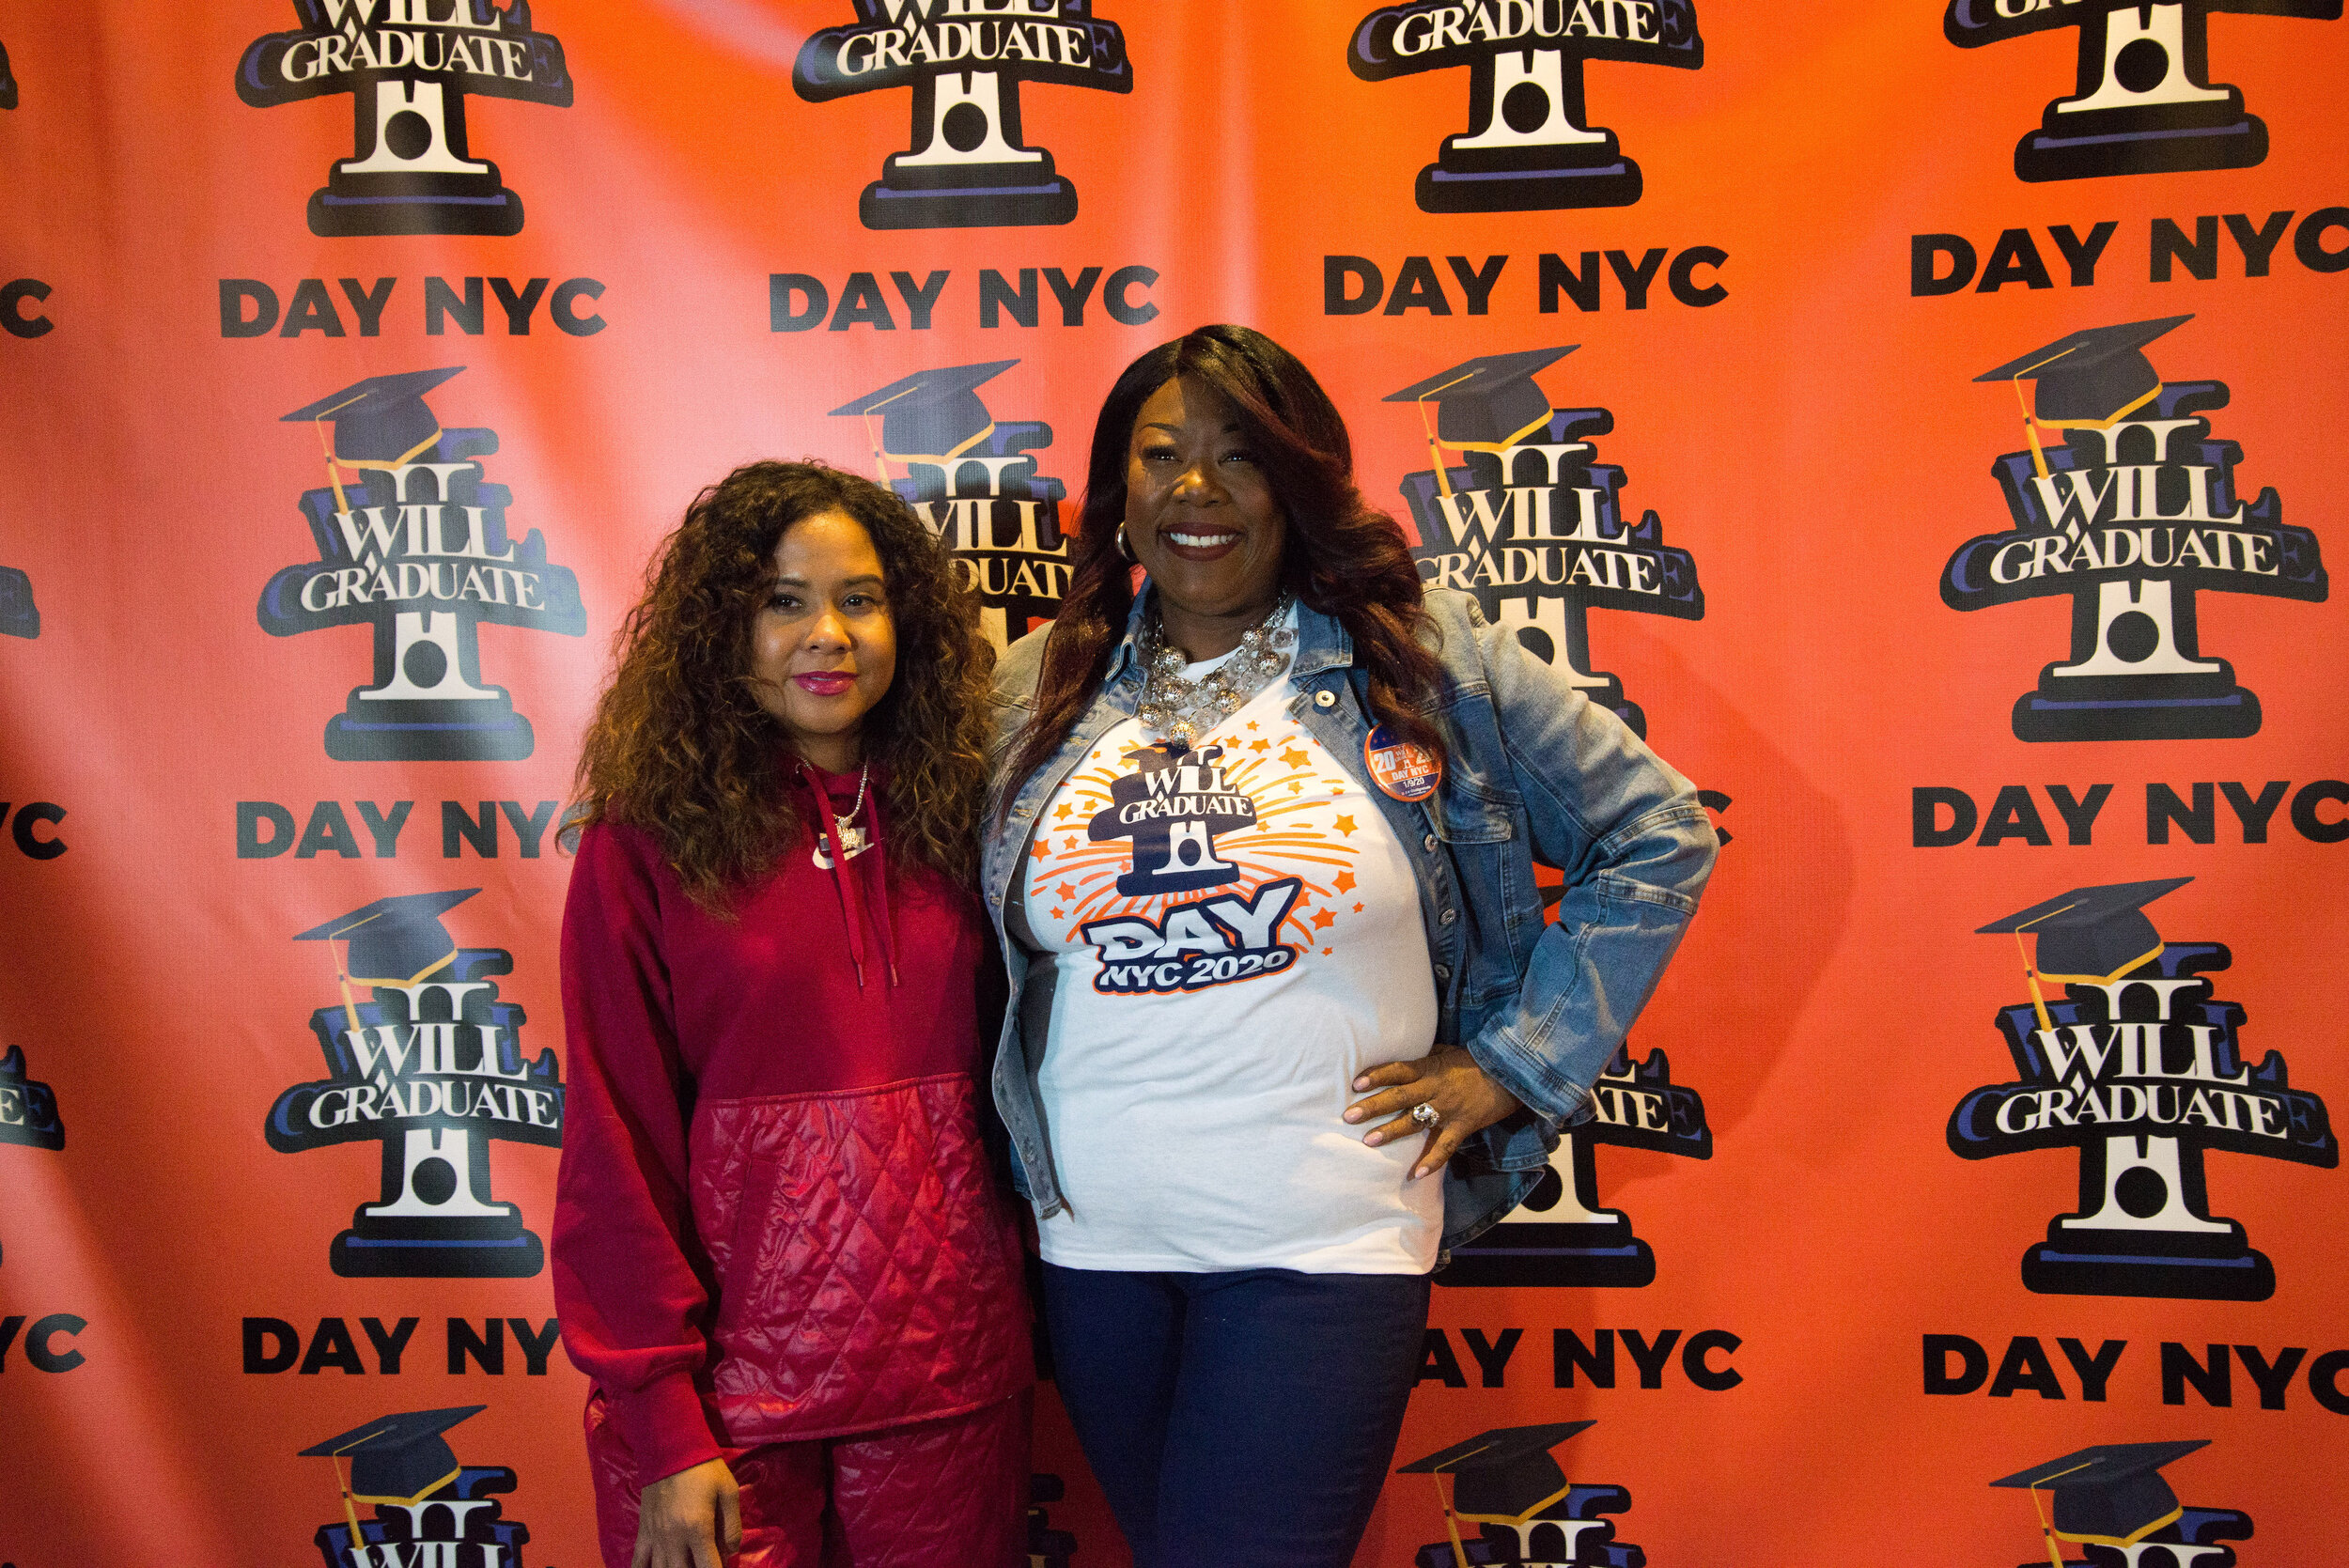 (Left to Right) Angela Yee (Breakfast Club) and Tonya Lewis Taylor (I WILL GRADUATE Executive Director). 